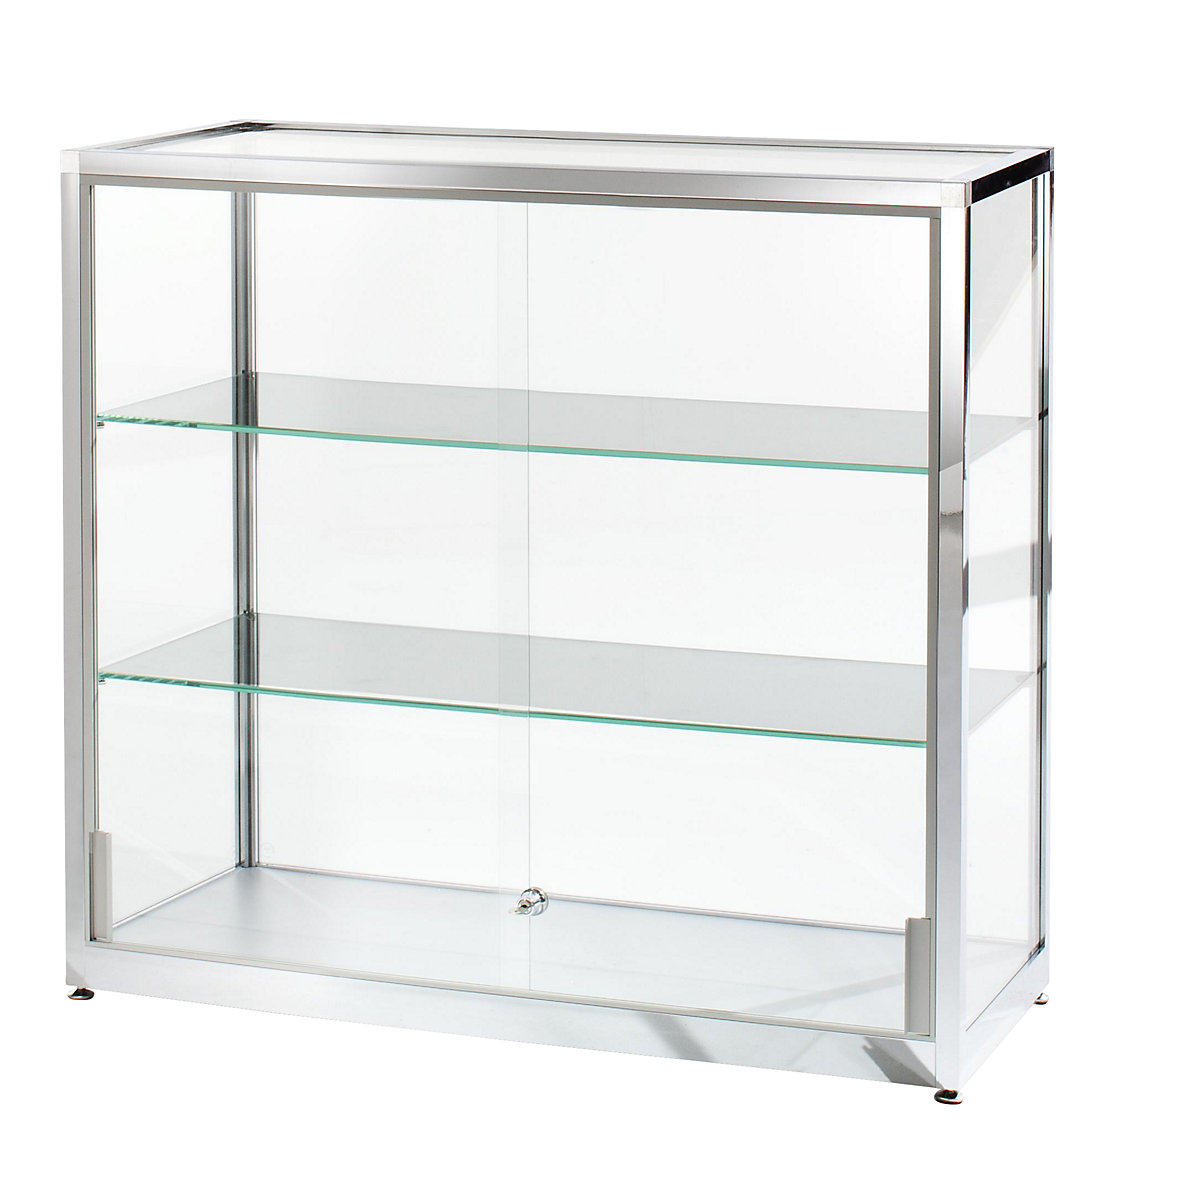 Half height glass cabinet, height 910 mm, 2 sliding doors, WxD 1000 x 400 mm, bright chrome plated-4